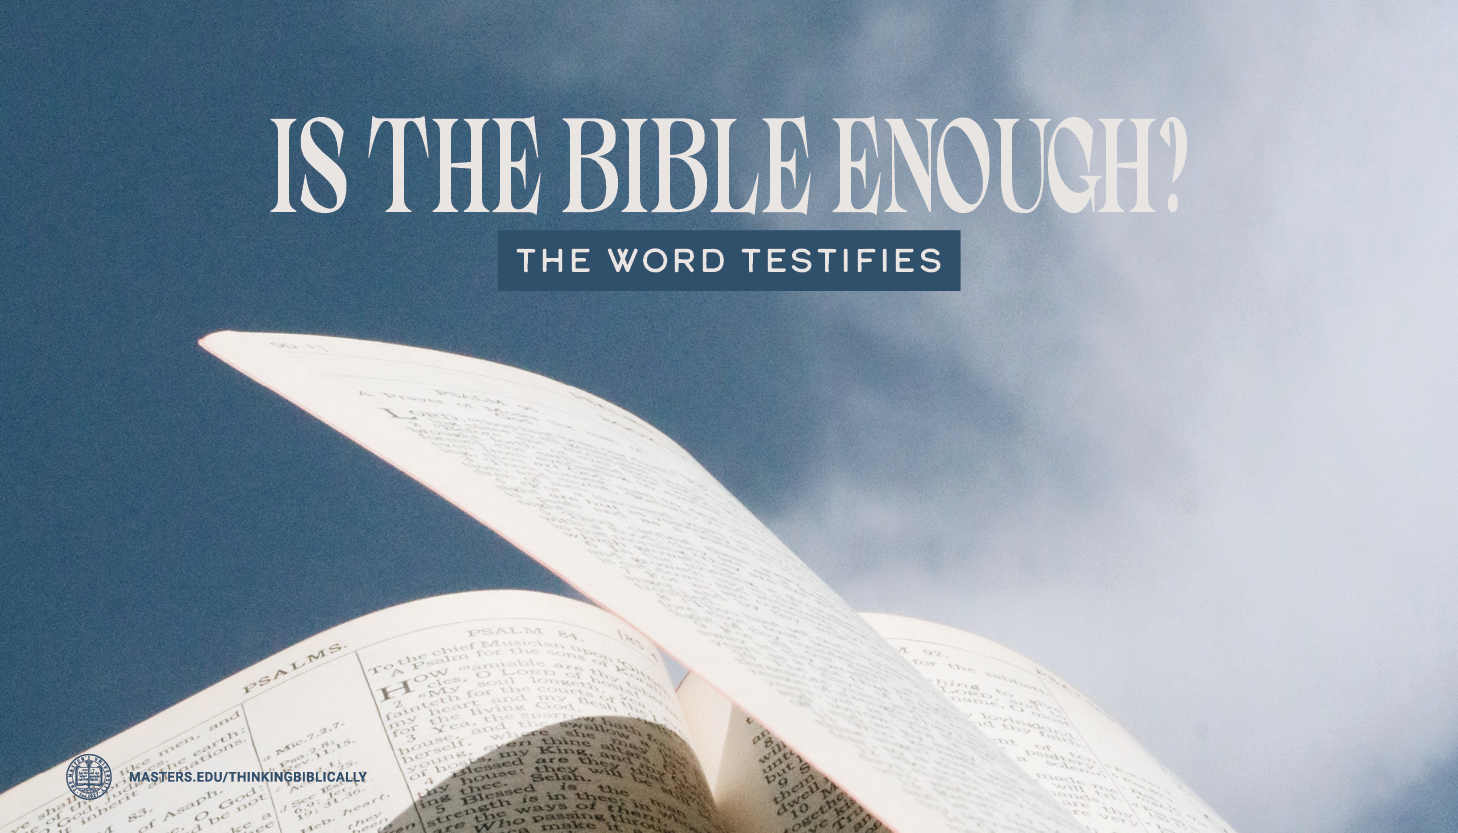 The Word Testifies to Its Sufficiency